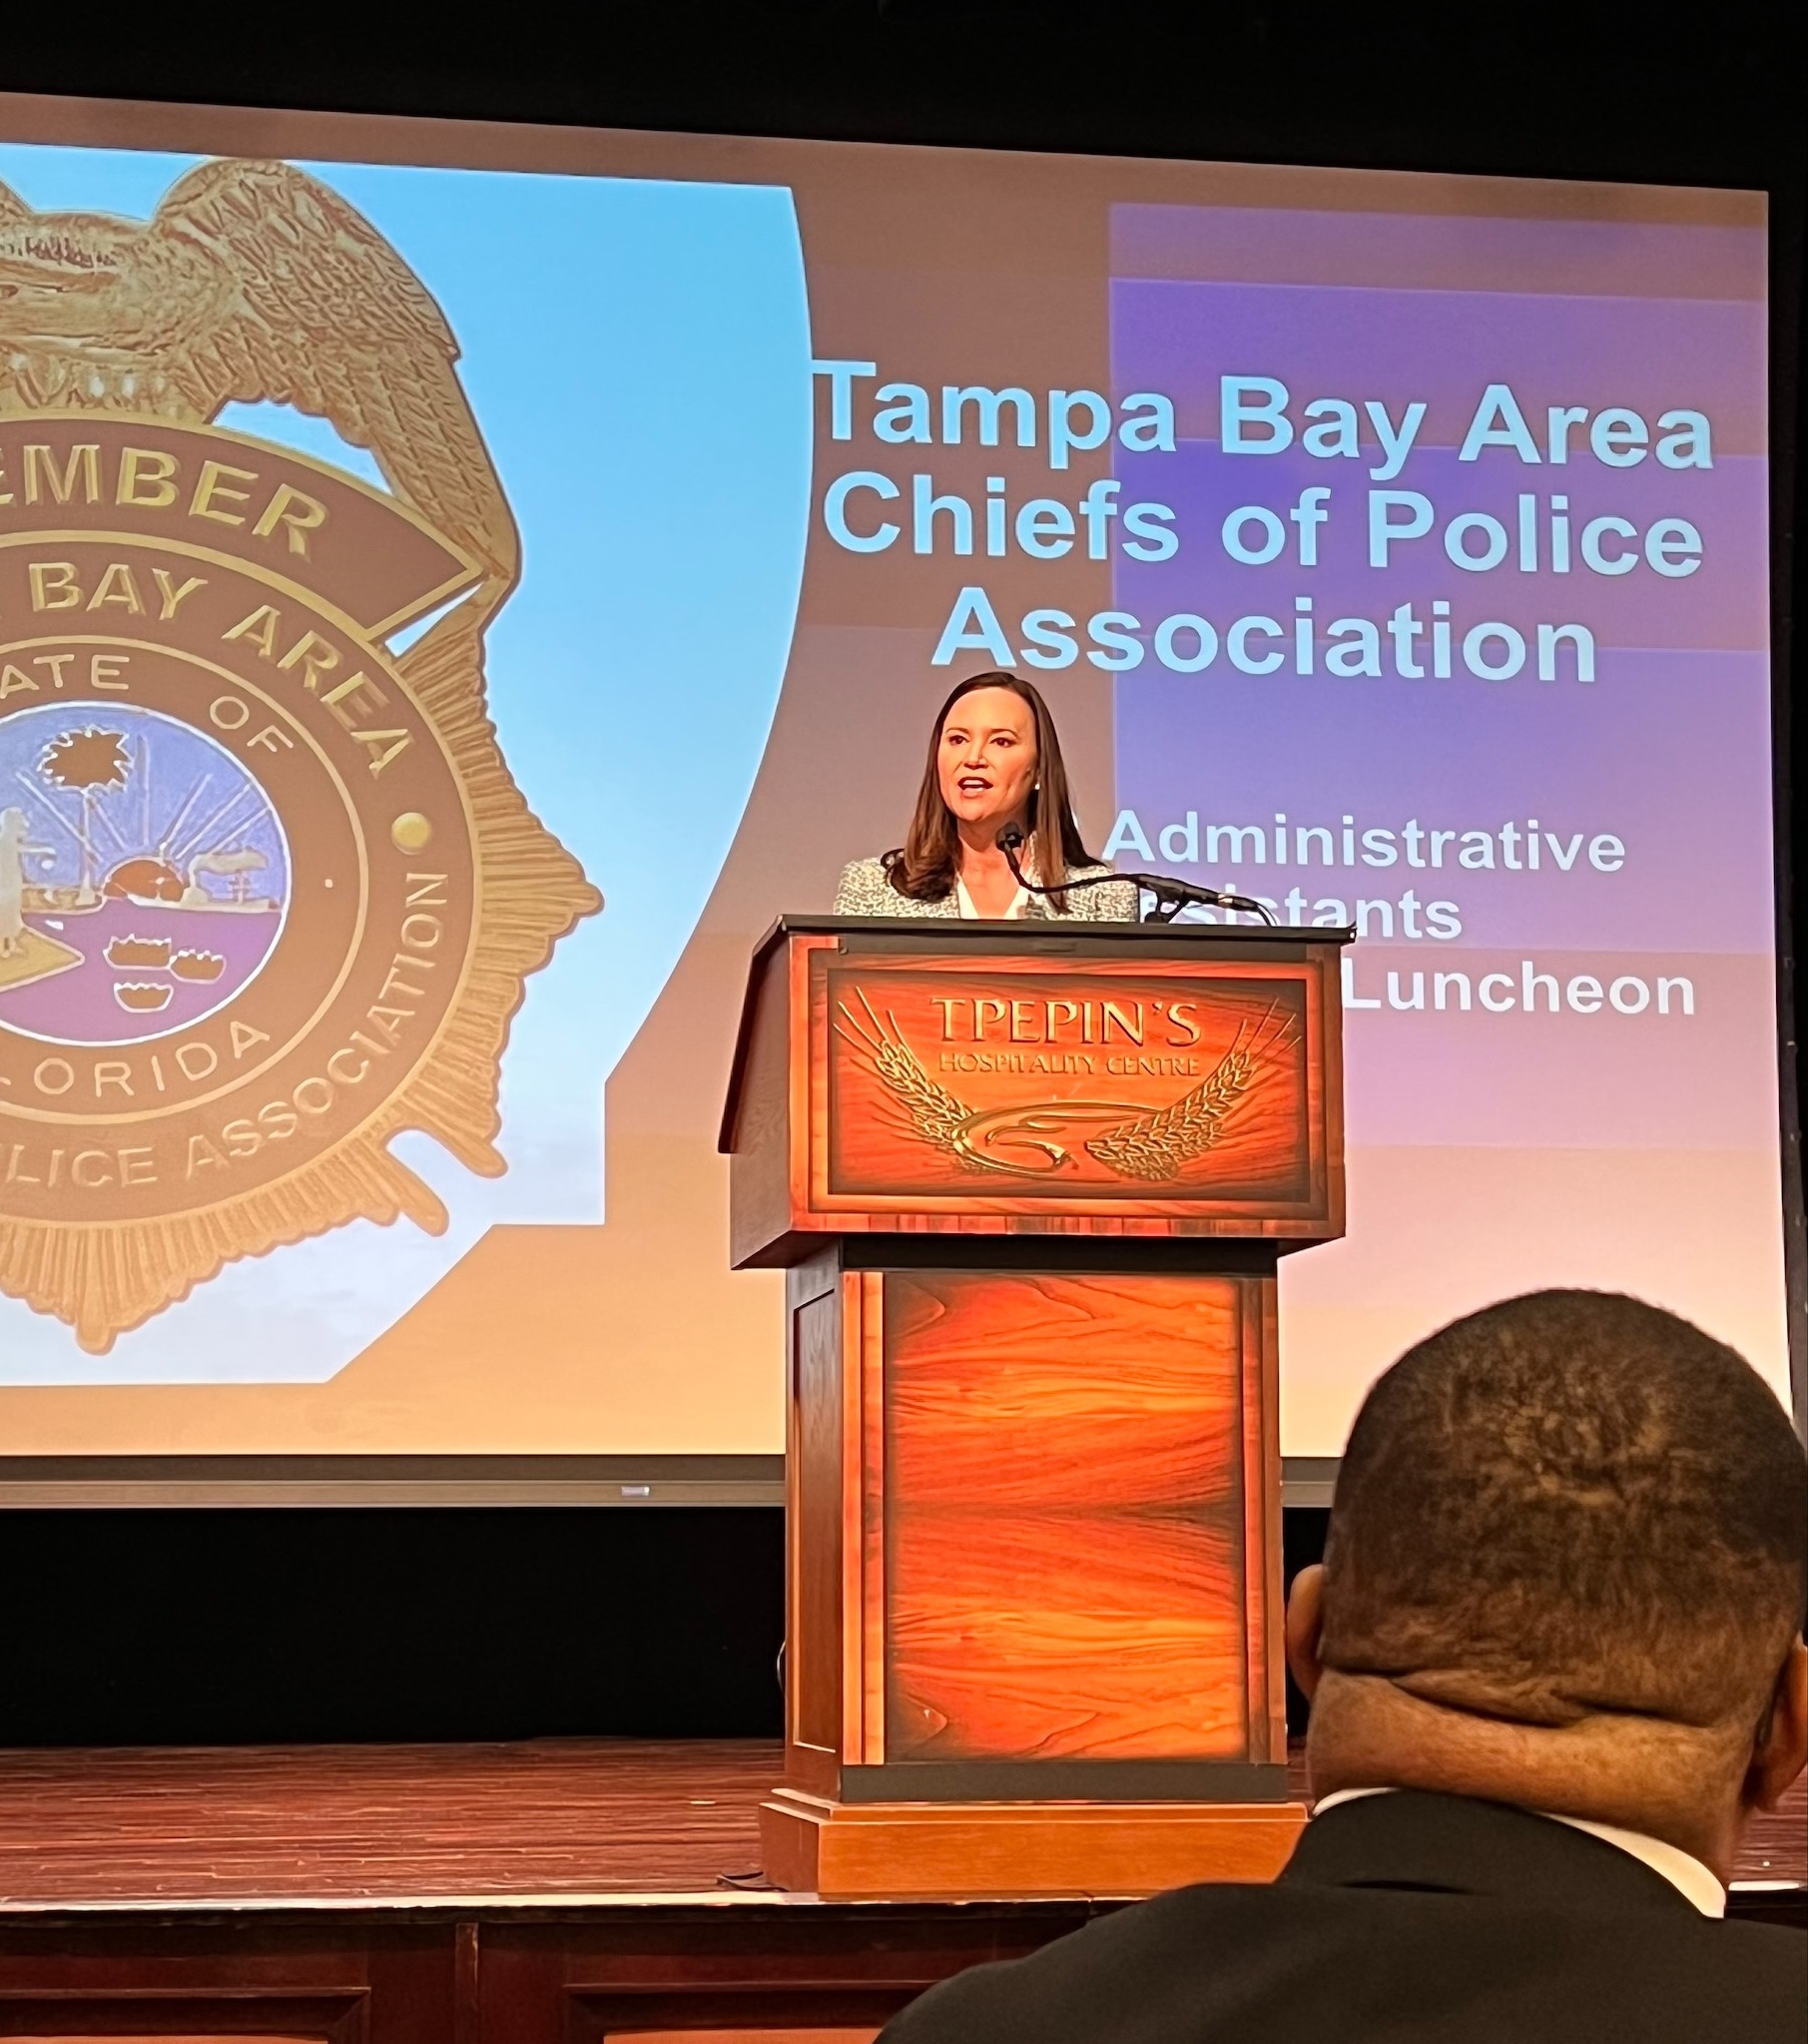 Tampa Bay Area Chiefs of Police Association